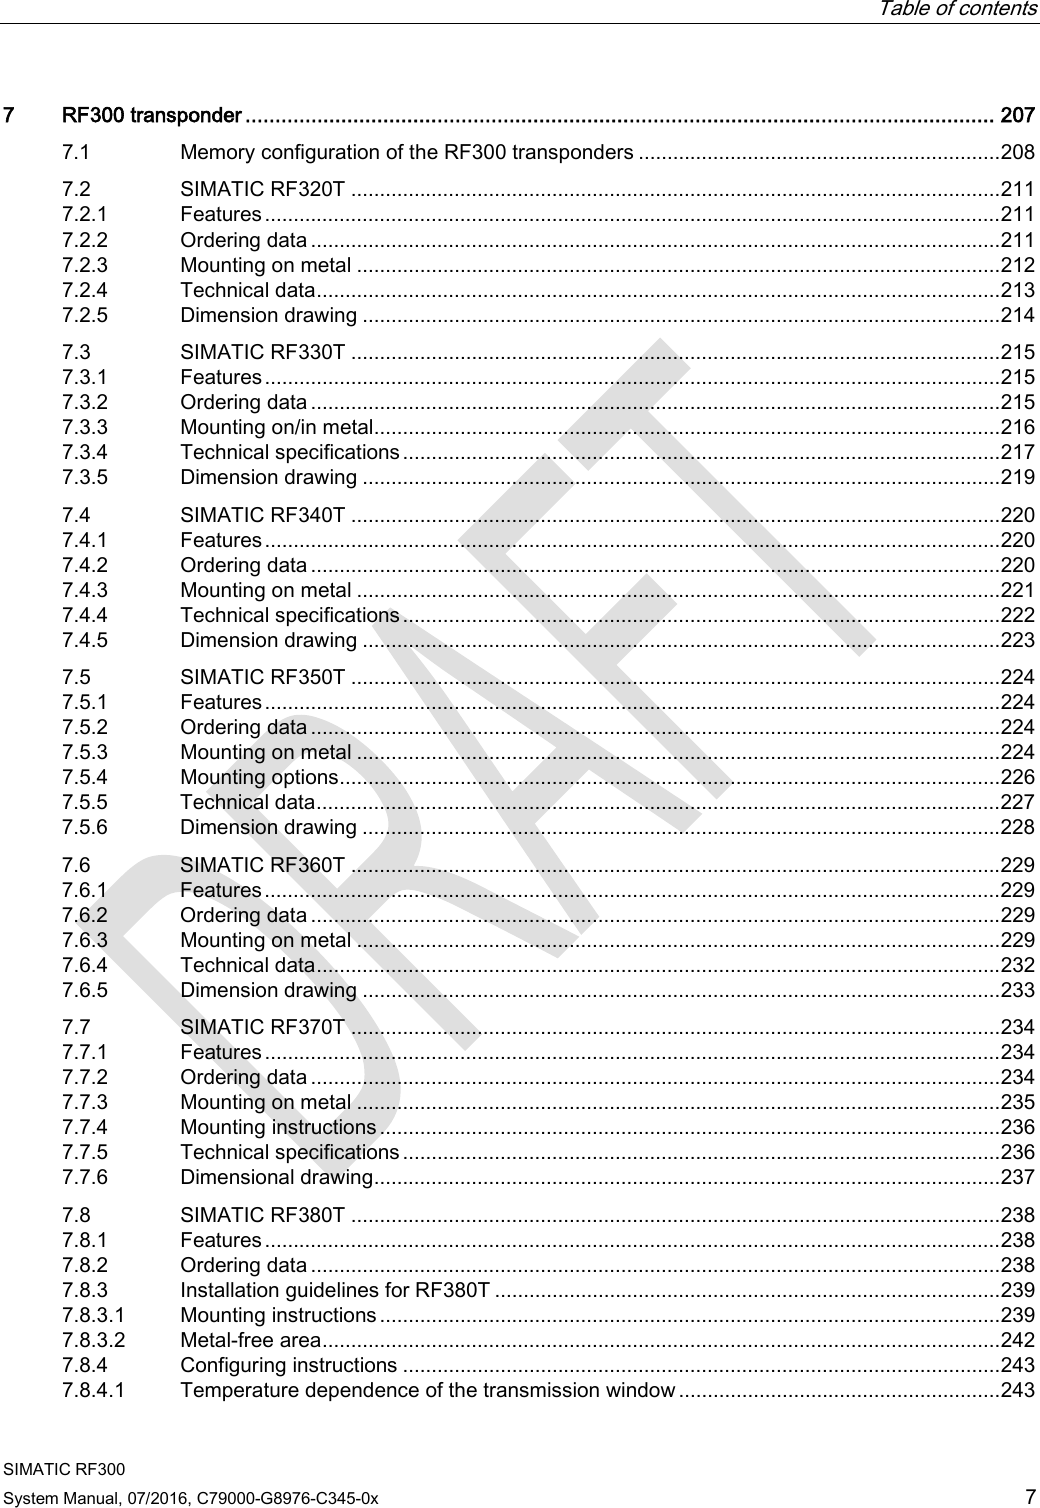  Table of contents  SIMATIC RF300 System Manual, 07/2016, C79000-G8976-C345-0x 7 7  RF300 transponder ............................................................................................................................. 207 7.1 Memory configuration of the RF300 transponders ............................................................... 208 7.2 SIMATIC RF320T ................................................................................................................. 211 7.2.1 Features ................................................................................................................................ 211 7.2.2 Ordering data ........................................................................................................................ 211 7.2.3 Mounting on metal ................................................................................................................ 212 7.2.4 Technical data ....................................................................................................................... 213 7.2.5 Dimension drawing ............................................................................................................... 214 7.3 SIMATIC RF330T ................................................................................................................. 215 7.3.1 Features ................................................................................................................................ 215 7.3.2 Ordering data ........................................................................................................................ 215 7.3.3 Mounting on/in metal............................................................................................................. 216 7.3.4 Technical specifications ........................................................................................................ 217 7.3.5 Dimension drawing ............................................................................................................... 219 7.4 SIMATIC RF340T ................................................................................................................. 220 7.4.1 Features ................................................................................................................................ 220 7.4.2 Ordering data ........................................................................................................................ 220 7.4.3 Mounting on metal ................................................................................................................ 221 7.4.4 Technical specifications ........................................................................................................ 222 7.4.5 Dimension drawing ............................................................................................................... 223 7.5 SIMATIC RF350T ................................................................................................................. 224 7.5.1 Features ................................................................................................................................ 224 7.5.2 Ordering data ........................................................................................................................ 224 7.5.3 Mounting on metal ................................................................................................................ 224 7.5.4 Mounting options ................................................................................................................... 226 7.5.5 Technical data ....................................................................................................................... 227 7.5.6 Dimension drawing ............................................................................................................... 228 7.6 SIMATIC RF360T ................................................................................................................. 229 7.6.1 Features ................................................................................................................................ 229 7.6.2 Ordering data ........................................................................................................................ 229 7.6.3 Mounting on metal ................................................................................................................ 229 7.6.4 Technical data ....................................................................................................................... 232 7.6.5 Dimension drawing ............................................................................................................... 233 7.7 SIMATIC RF370T ................................................................................................................. 234 7.7.1 Features ................................................................................................................................ 234 7.7.2 Ordering data ........................................................................................................................ 234 7.7.3 Mounting on metal ................................................................................................................ 235 7.7.4 Mounting instructions ............................................................................................................ 236 7.7.5 Technical specifications ........................................................................................................ 236 7.7.6 Dimensional drawing............................................................................................................. 237 7.8 SIMATIC RF380T ................................................................................................................. 238 7.8.1 Features ................................................................................................................................ 238 7.8.2 Ordering data ........................................................................................................................ 238 7.8.3 Installation guidelines for RF380T ........................................................................................ 239 7.8.3.1 Mounting instructions ............................................................................................................ 239 7.8.3.2 Metal-free area ...................................................................................................................... 242 7.8.4 Configuring instructions ........................................................................................................ 243 7.8.4.1 Temperature dependence of the transmission window ........................................................ 243 